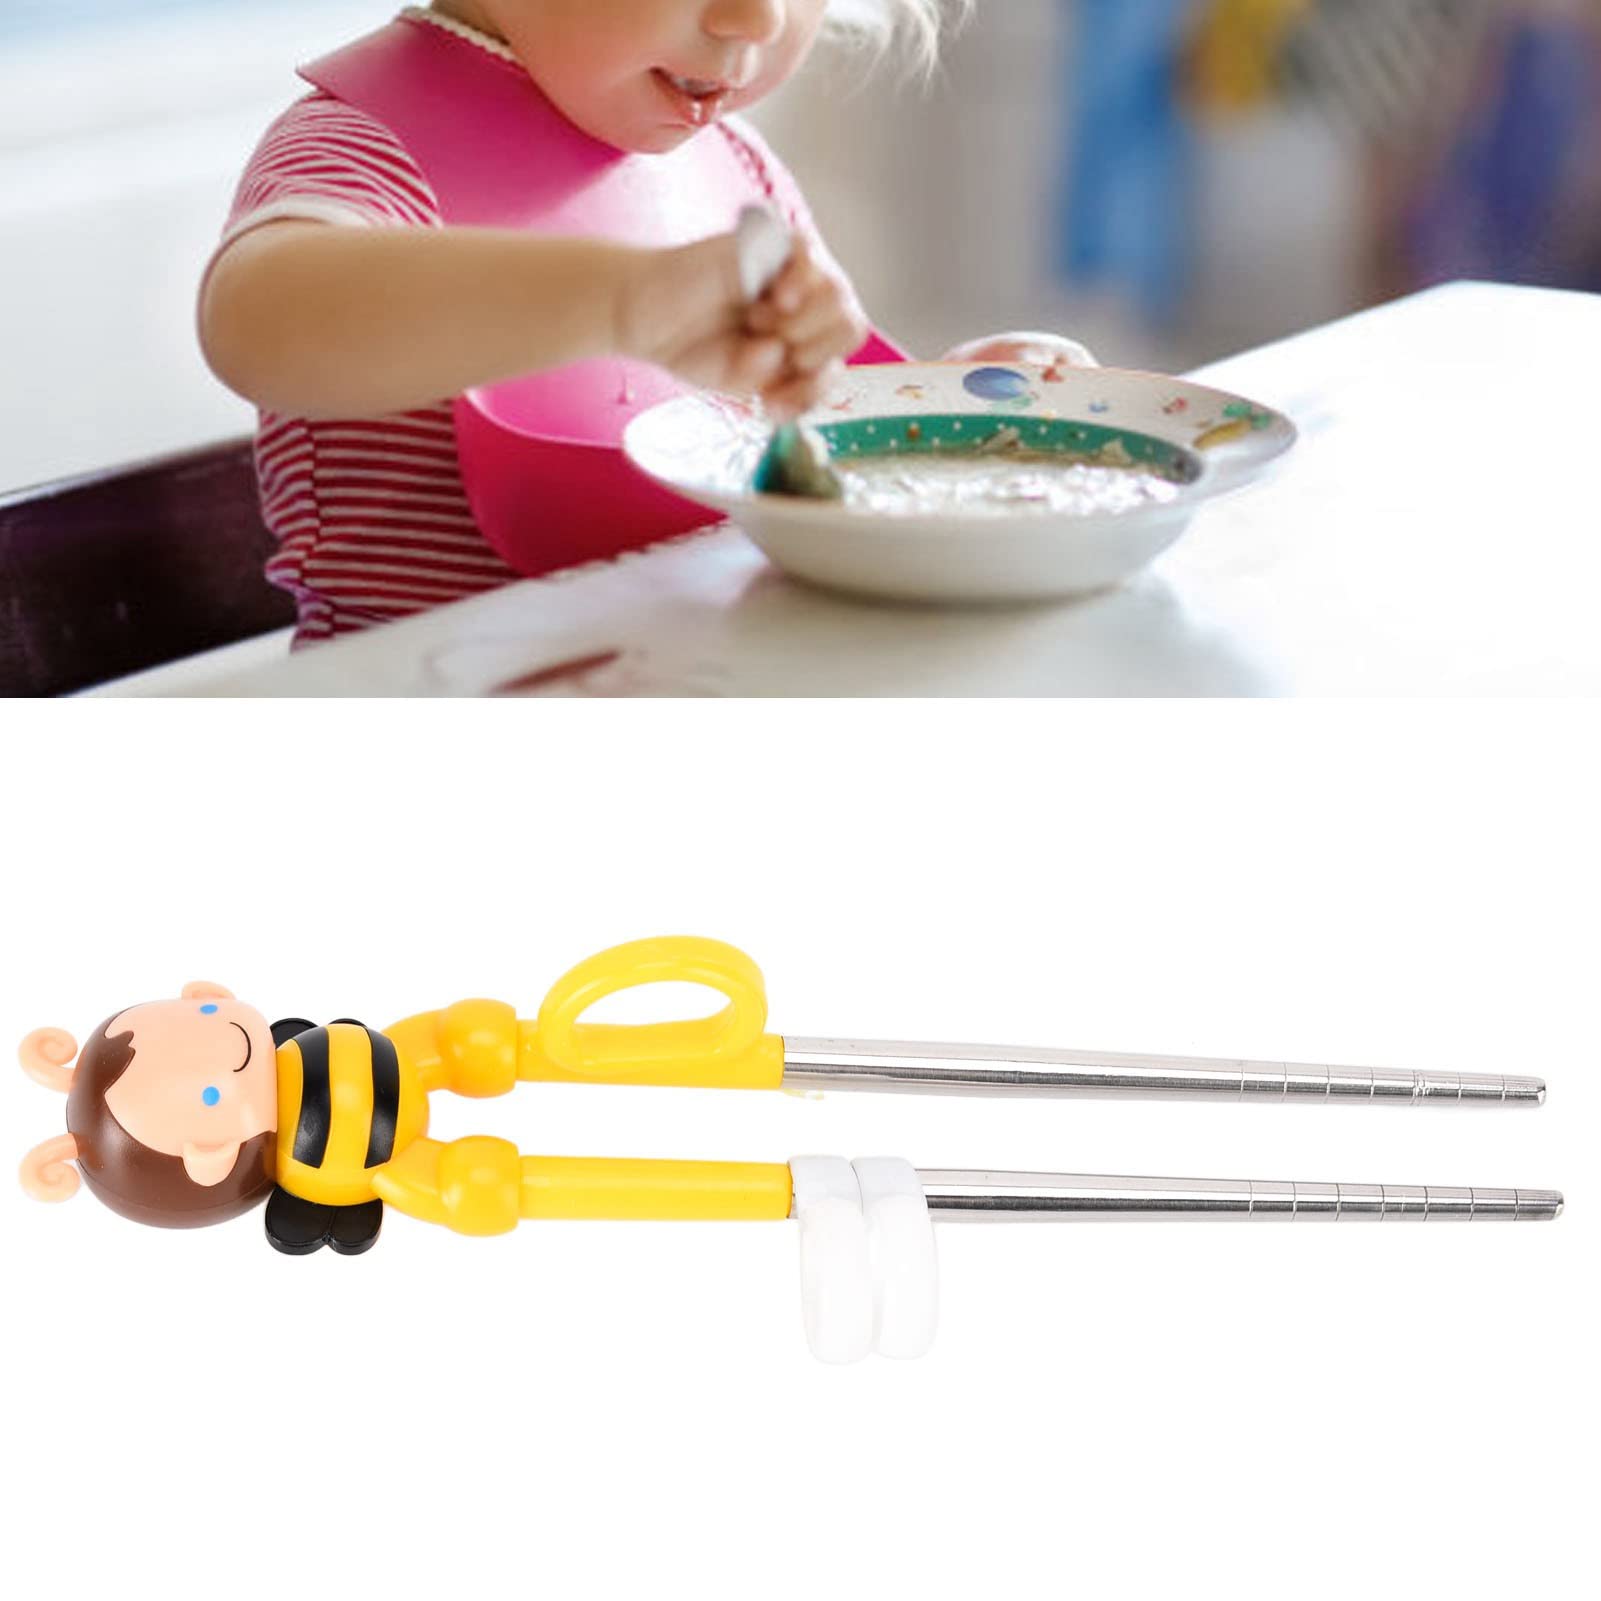 Children's Practice Chopsticks, Cute Yellow Bee Soft PP Silicone Training Chopsticks Dishwasher Safe Develop Fine Motor Skills for Right Hand Use(Bee-stainless steel yellow)